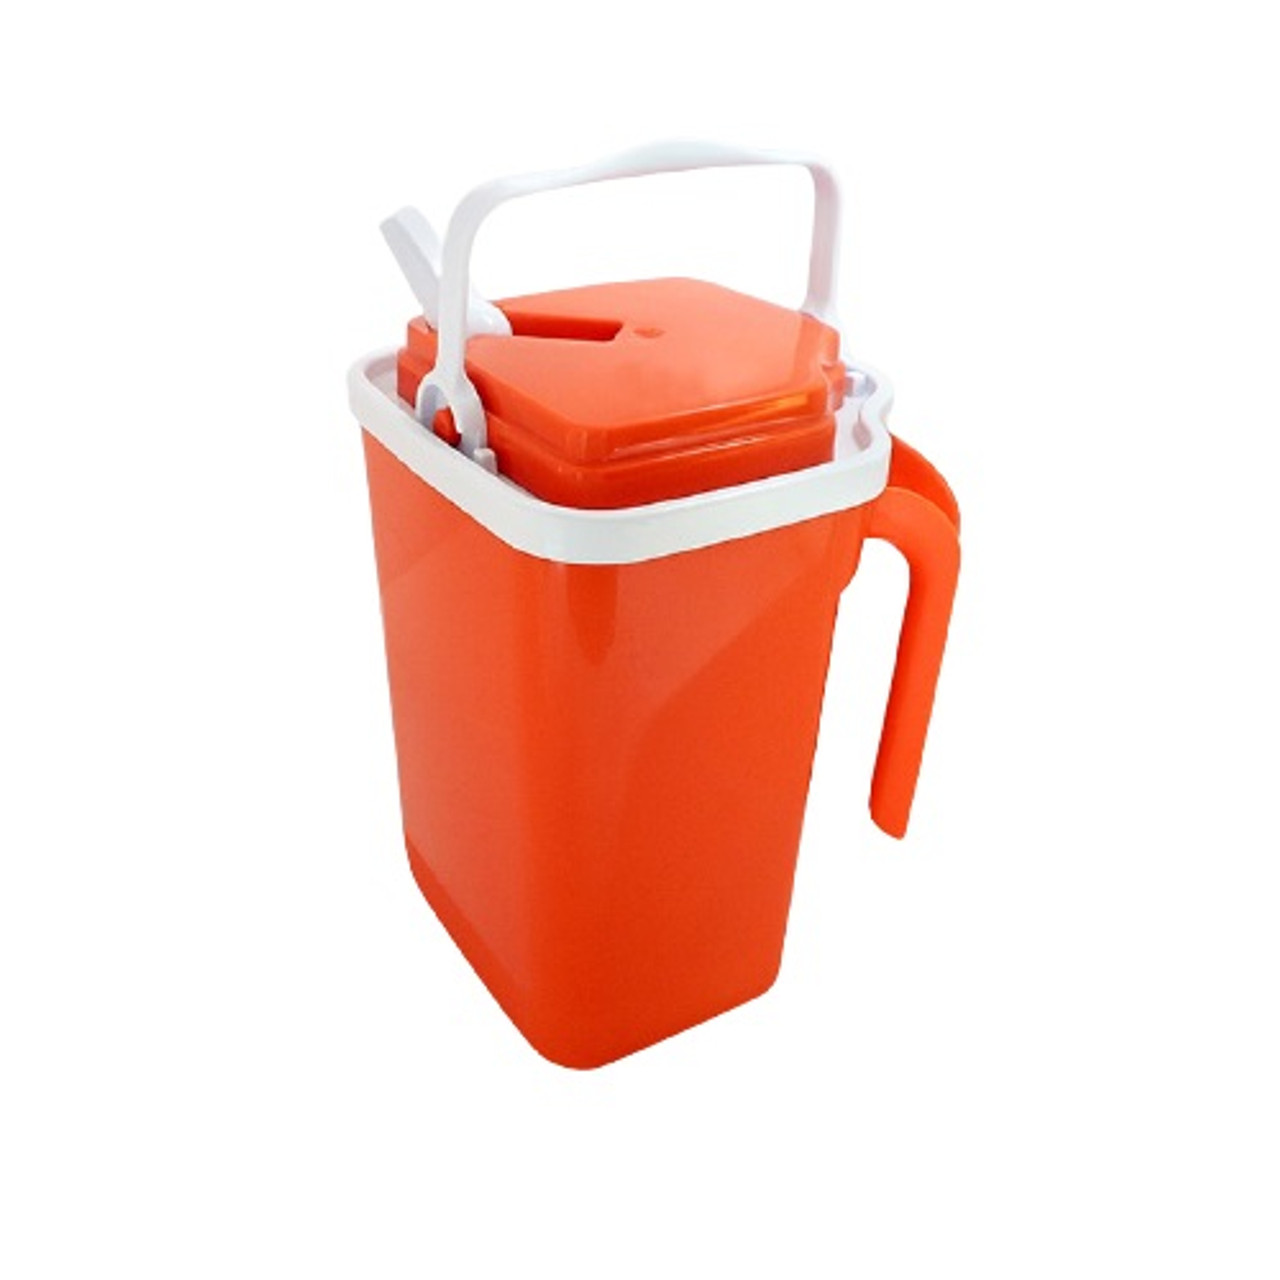 https://cdn11.bigcommerce.com/s-3stx4pub31/images/stencil/1280x1280/products/4383/11608/termo-camping-beverage-dispenser-red-2__71642.1648485414.jpg?c=2?imbypass=on